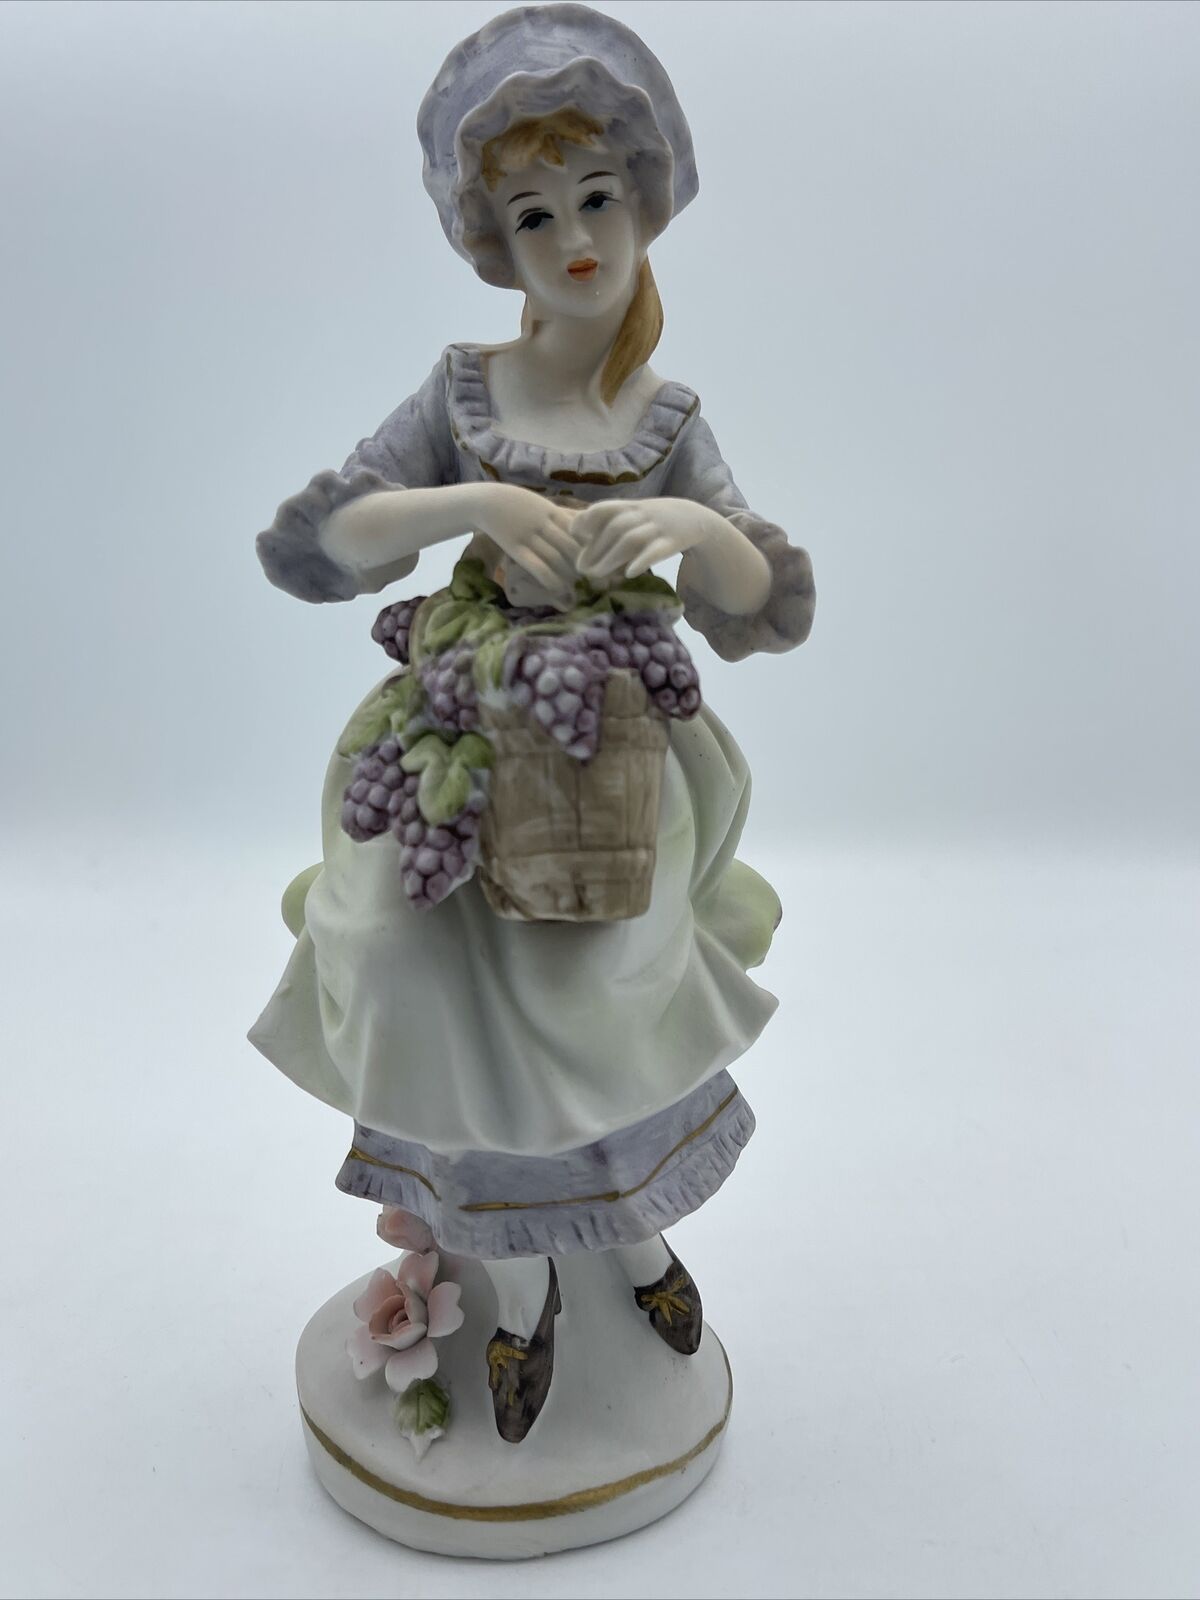 Rare Vtg Woman Victorian Figurine Holding Basket Of Grapes